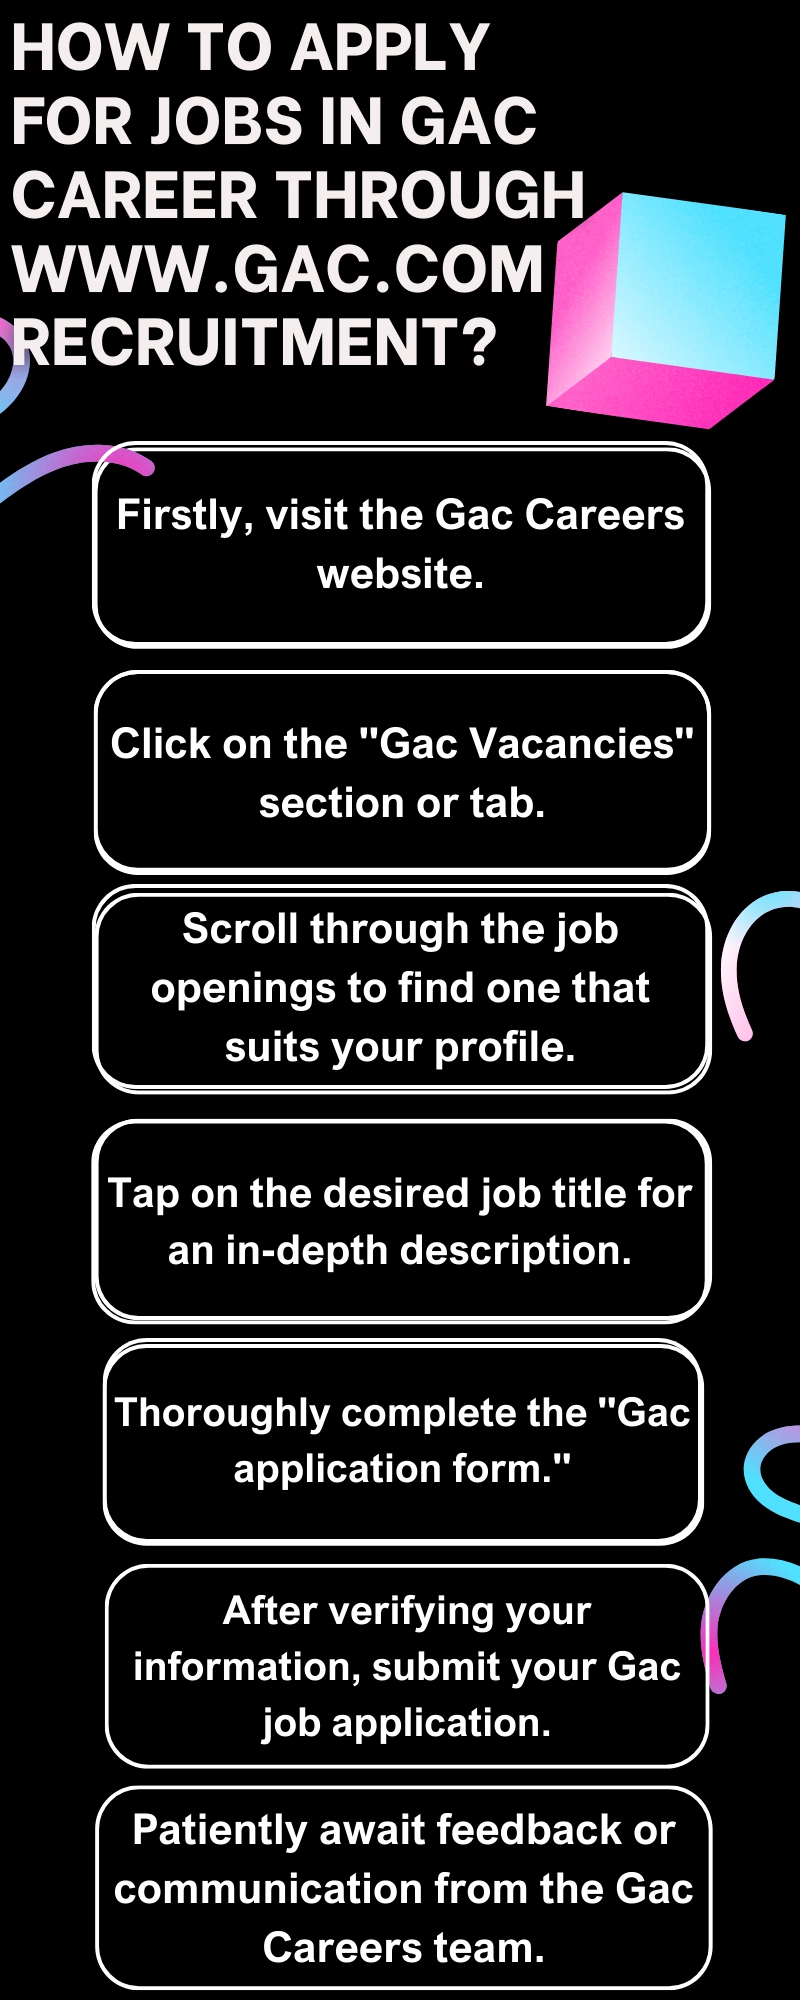 How to Apply for Jobs in Gac Career through www.gac.com recruitment?